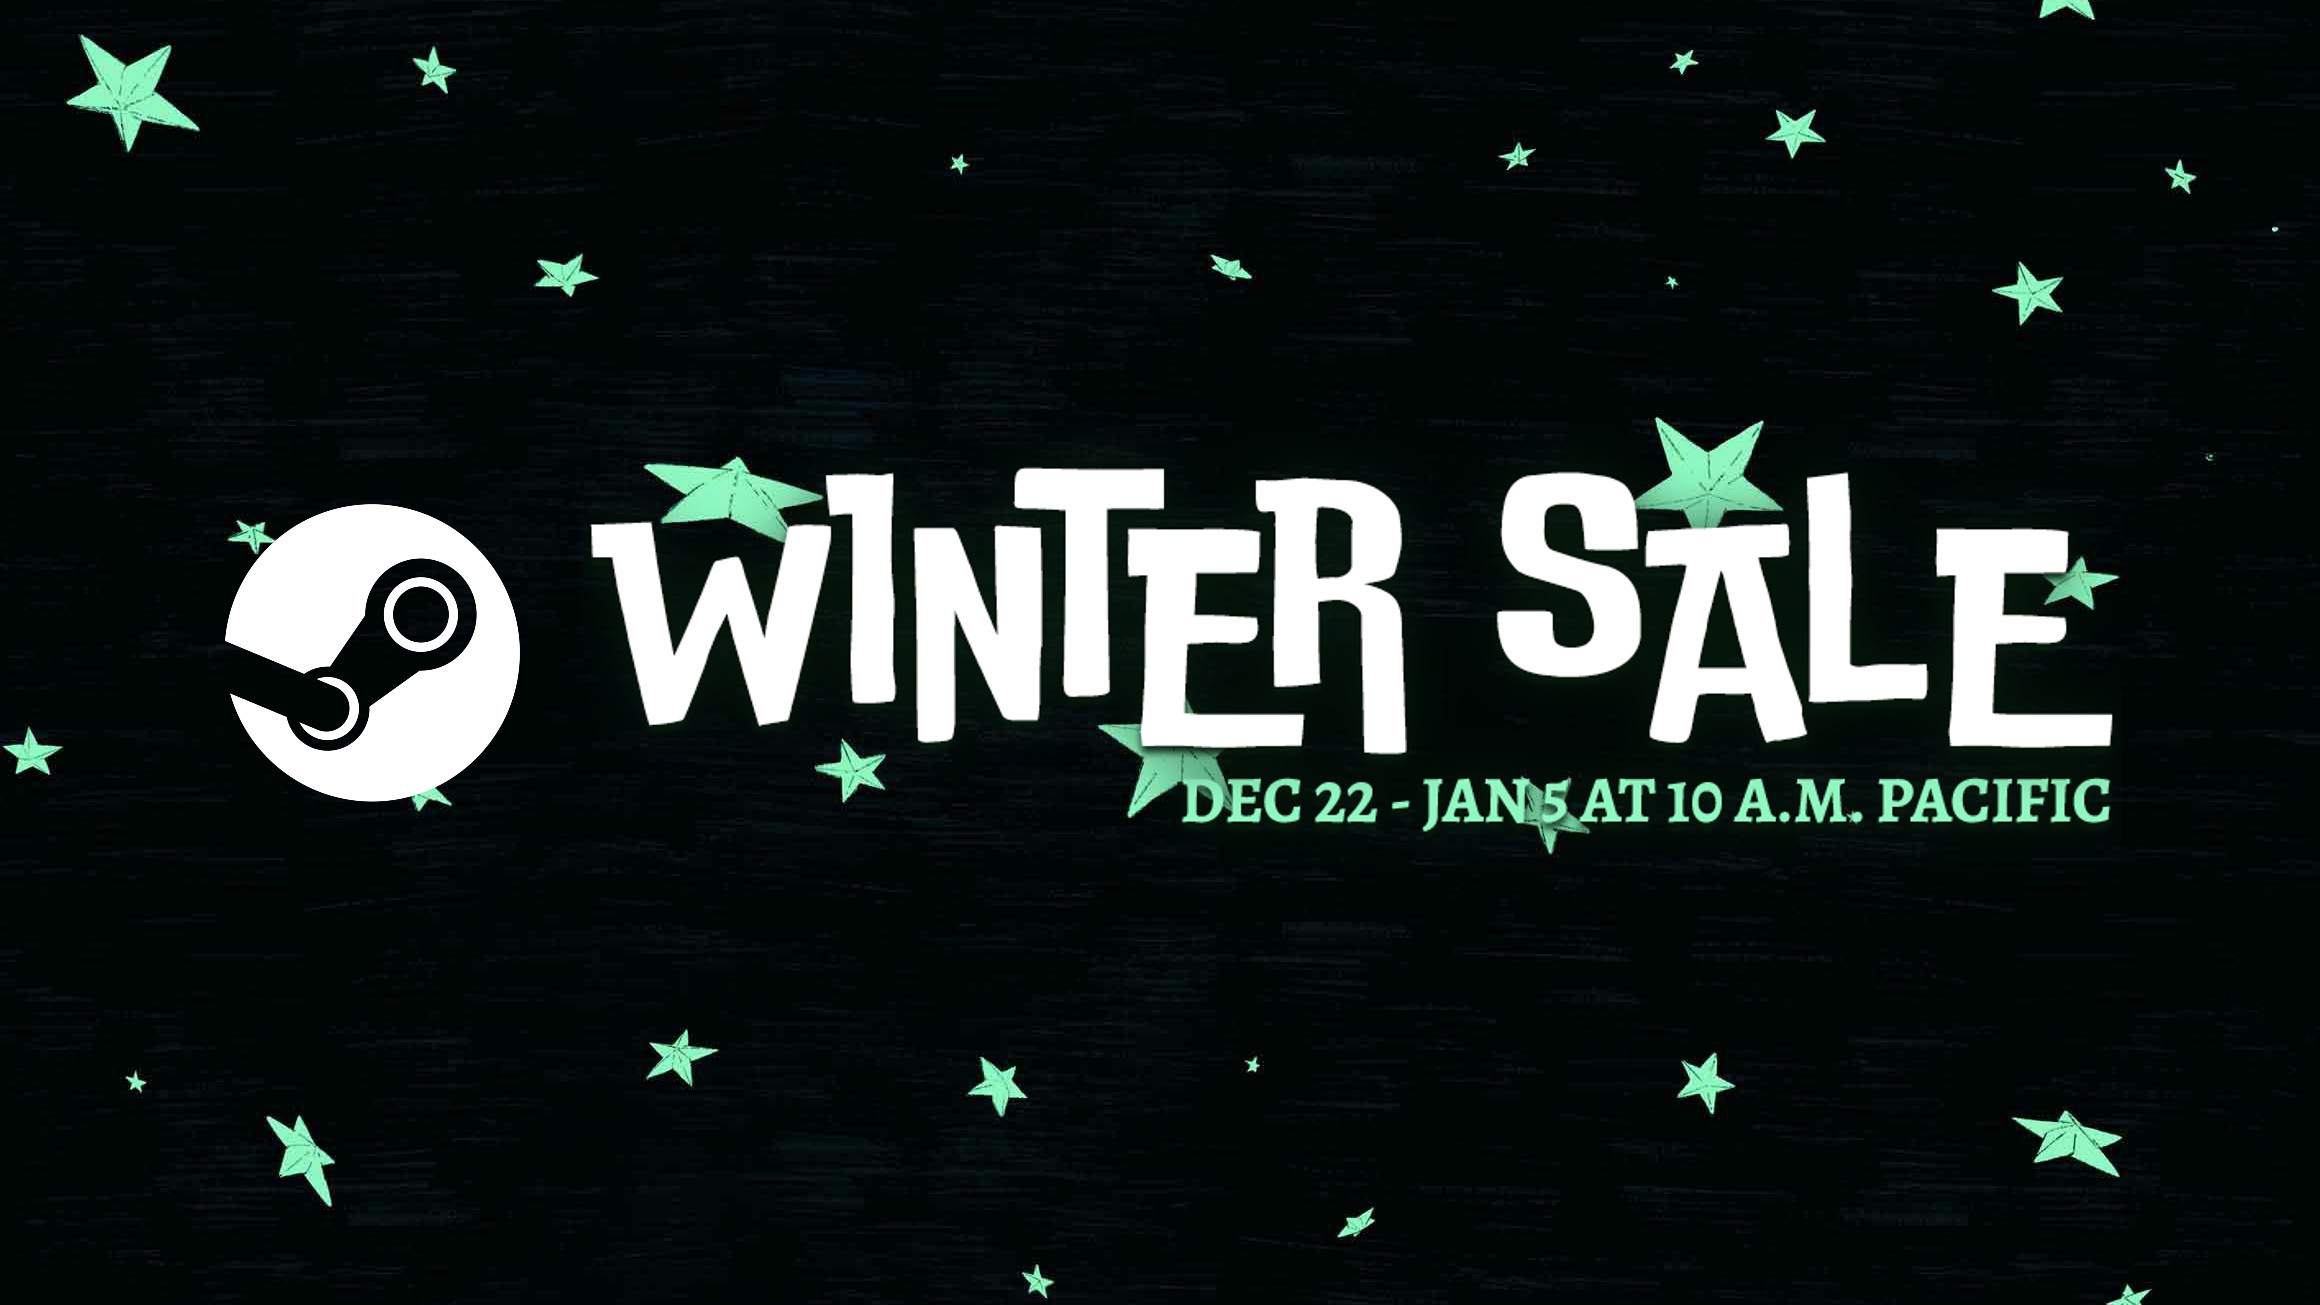 Steam Winter Sale Slashes Prices on Award-winning PC VR Games, Ends January 5th